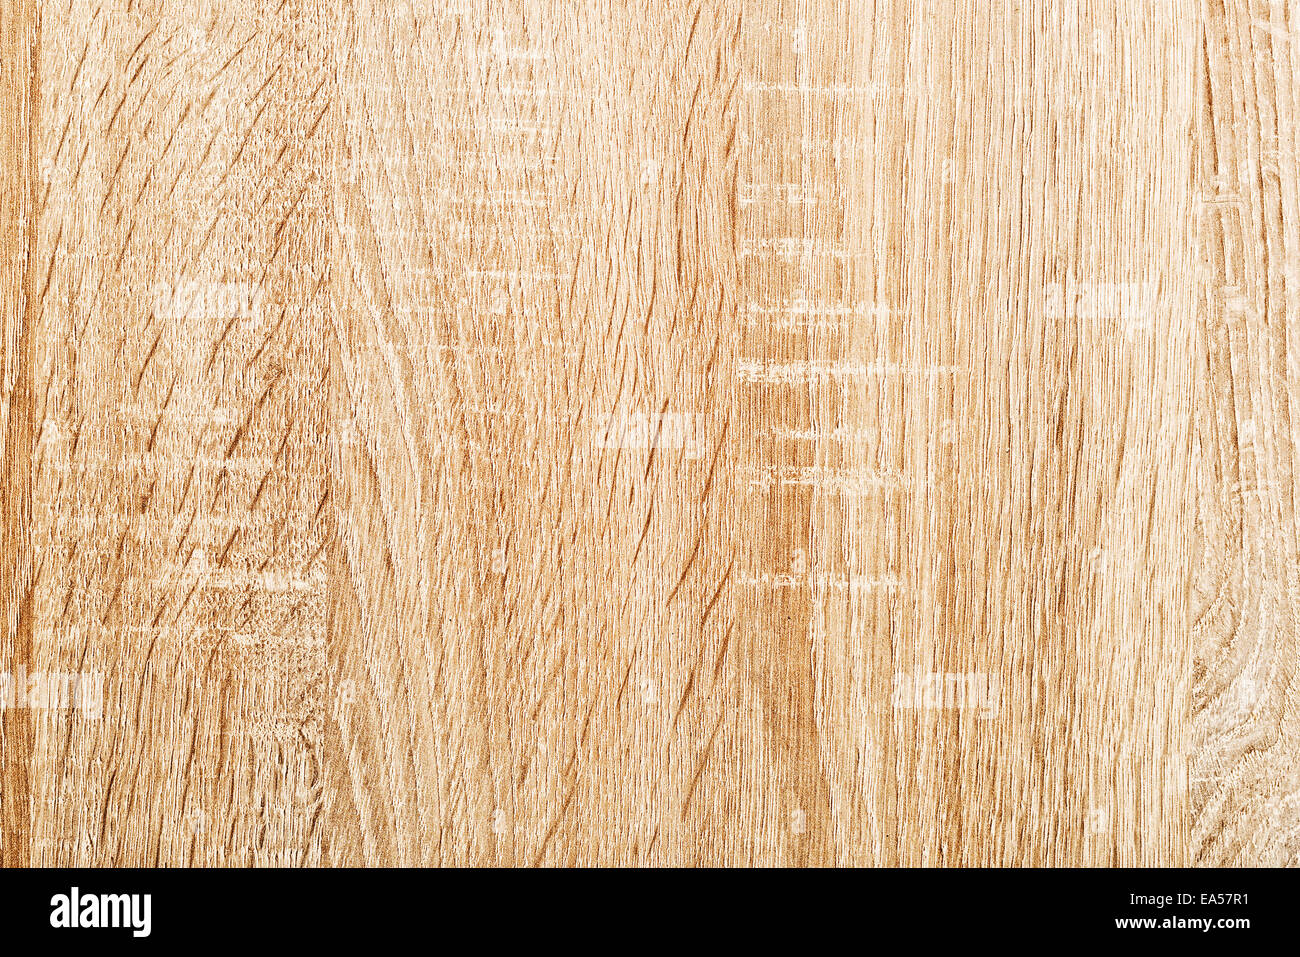 Vintage Oak Wood Pattern Texture as natural background Stock Photo